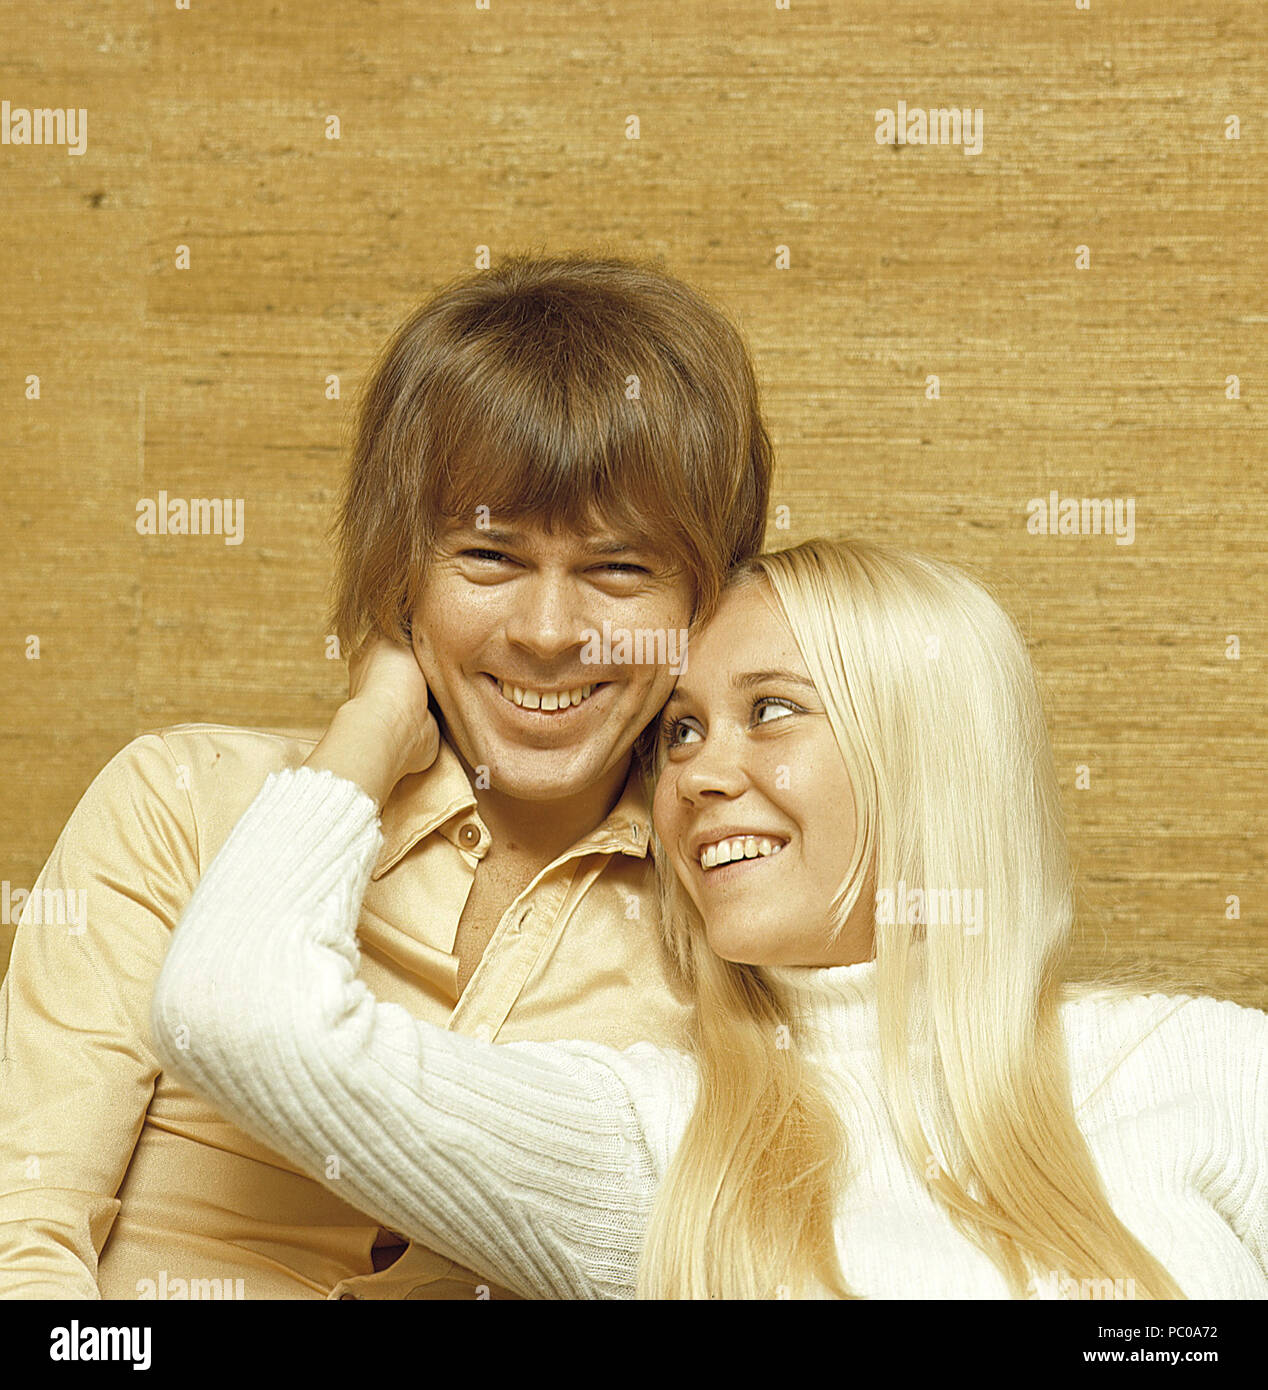 ABBA. Agnetha Fältskog. Singer. Member the pop group ABBA. Born 1950. Pictured here at home with her fiance Björn 1970 whom she married on 6 July 1971. Photo: Kristoffersson Stock Photo - Alamy